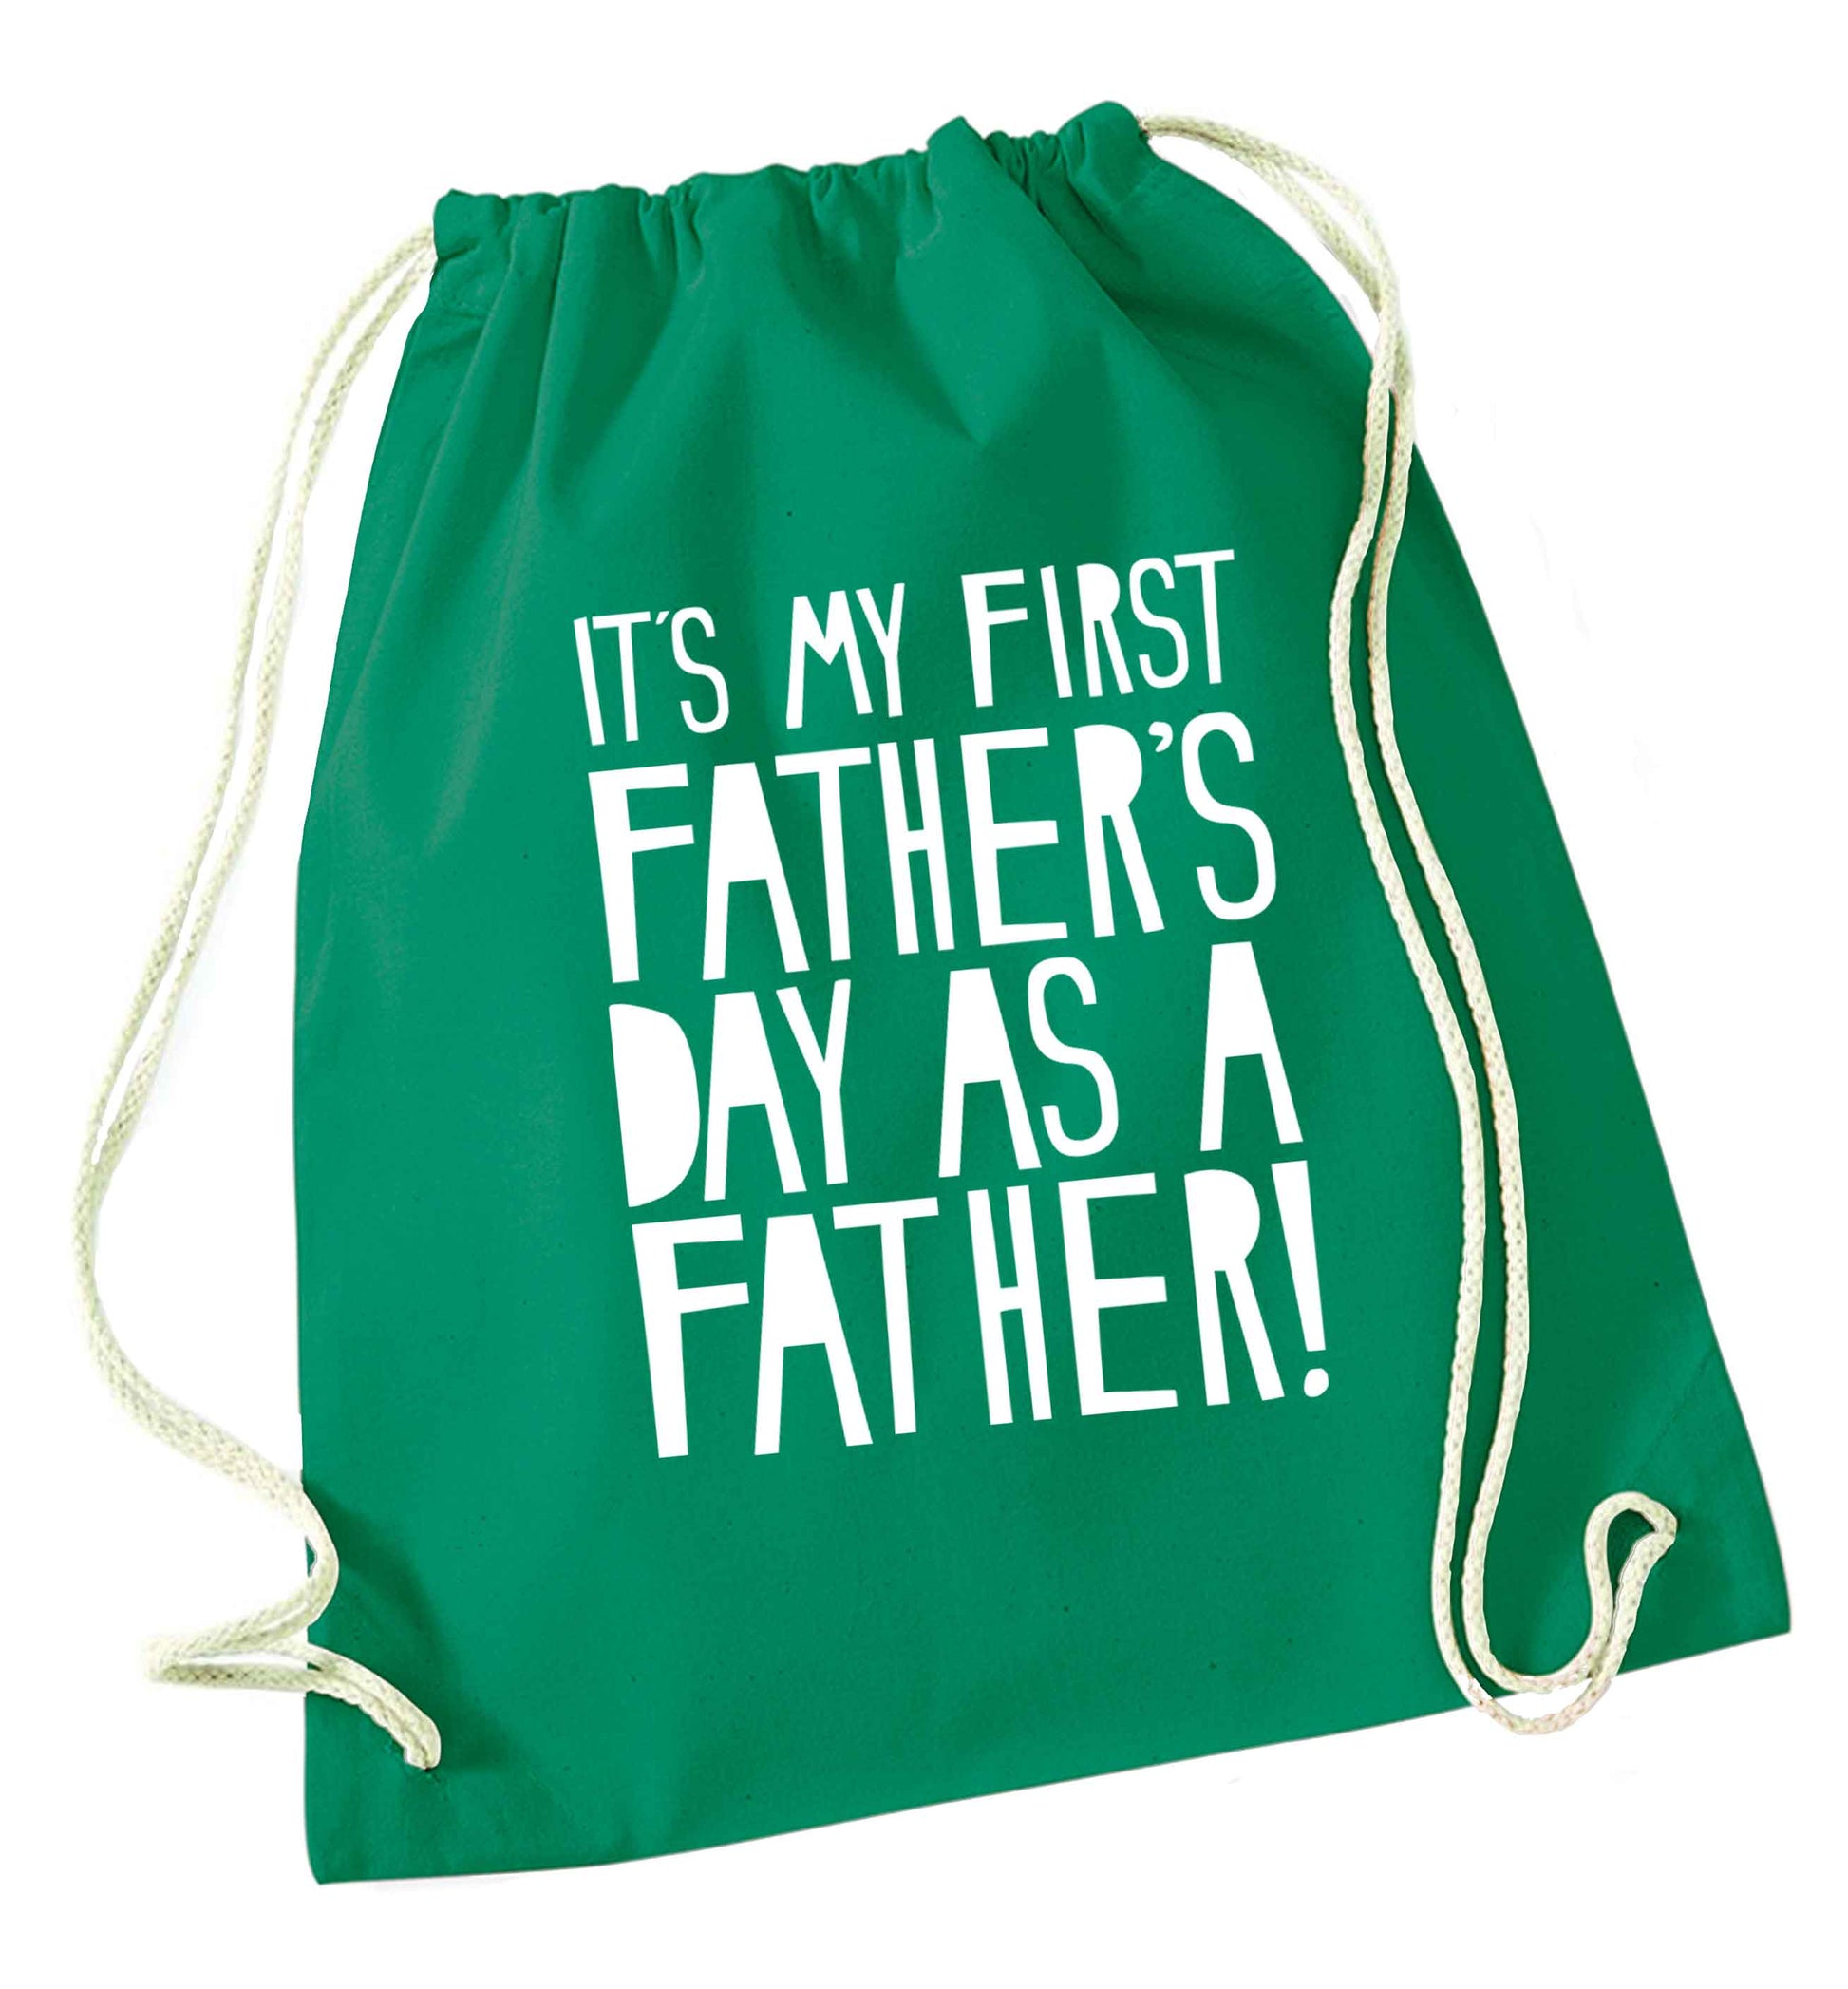 It's my first father's day as a father! green drawstring bag